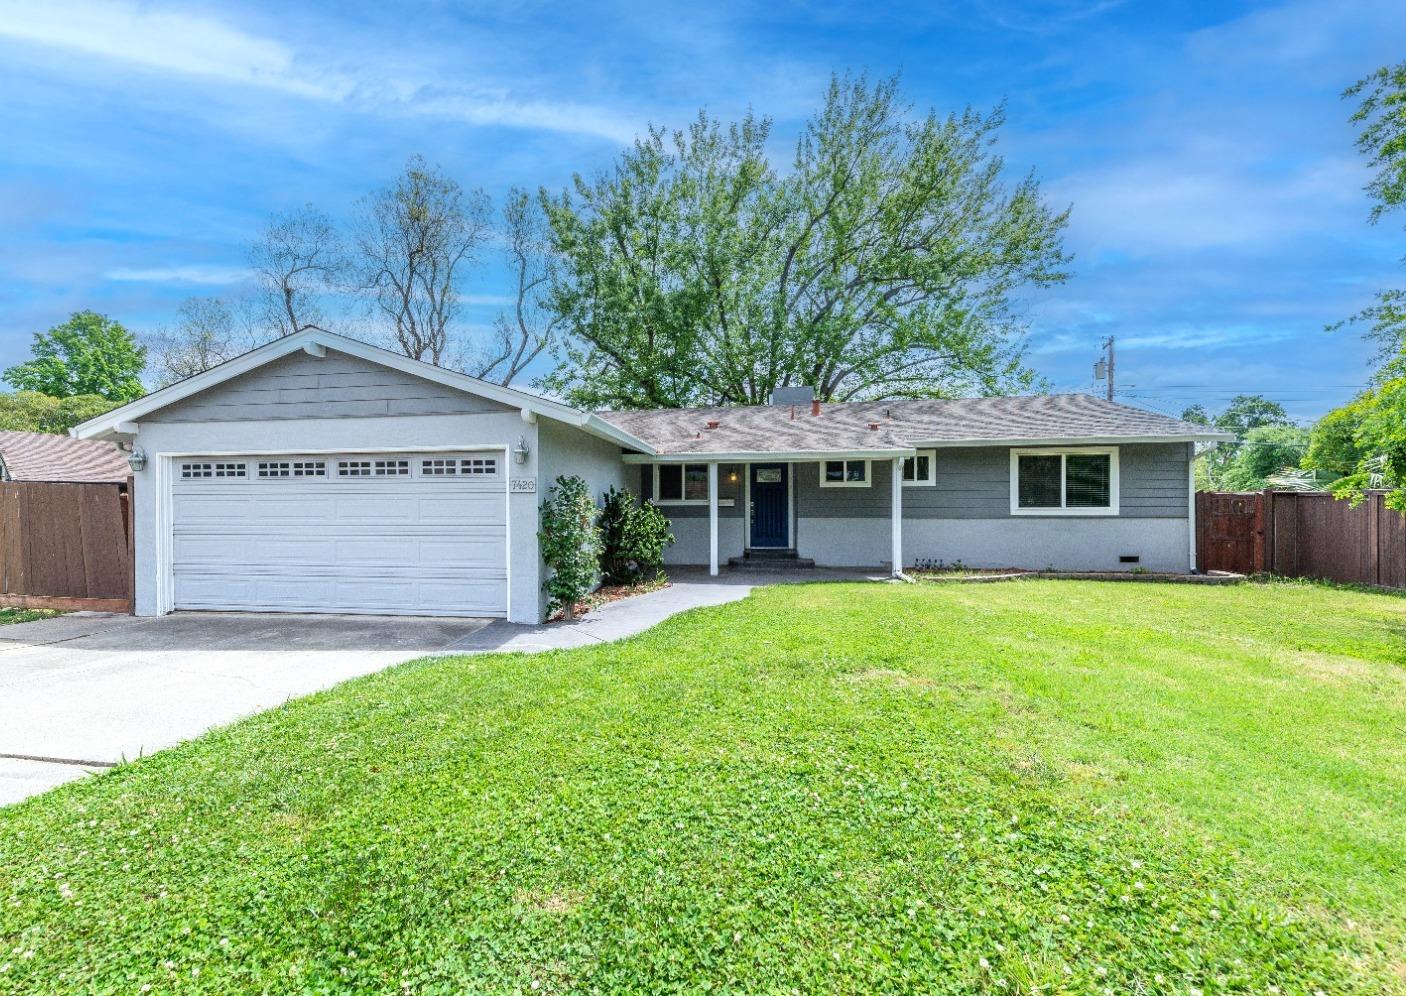 This charming Citrus Heights ranch style home has it all! Situated on a quiet, tree lined street, on